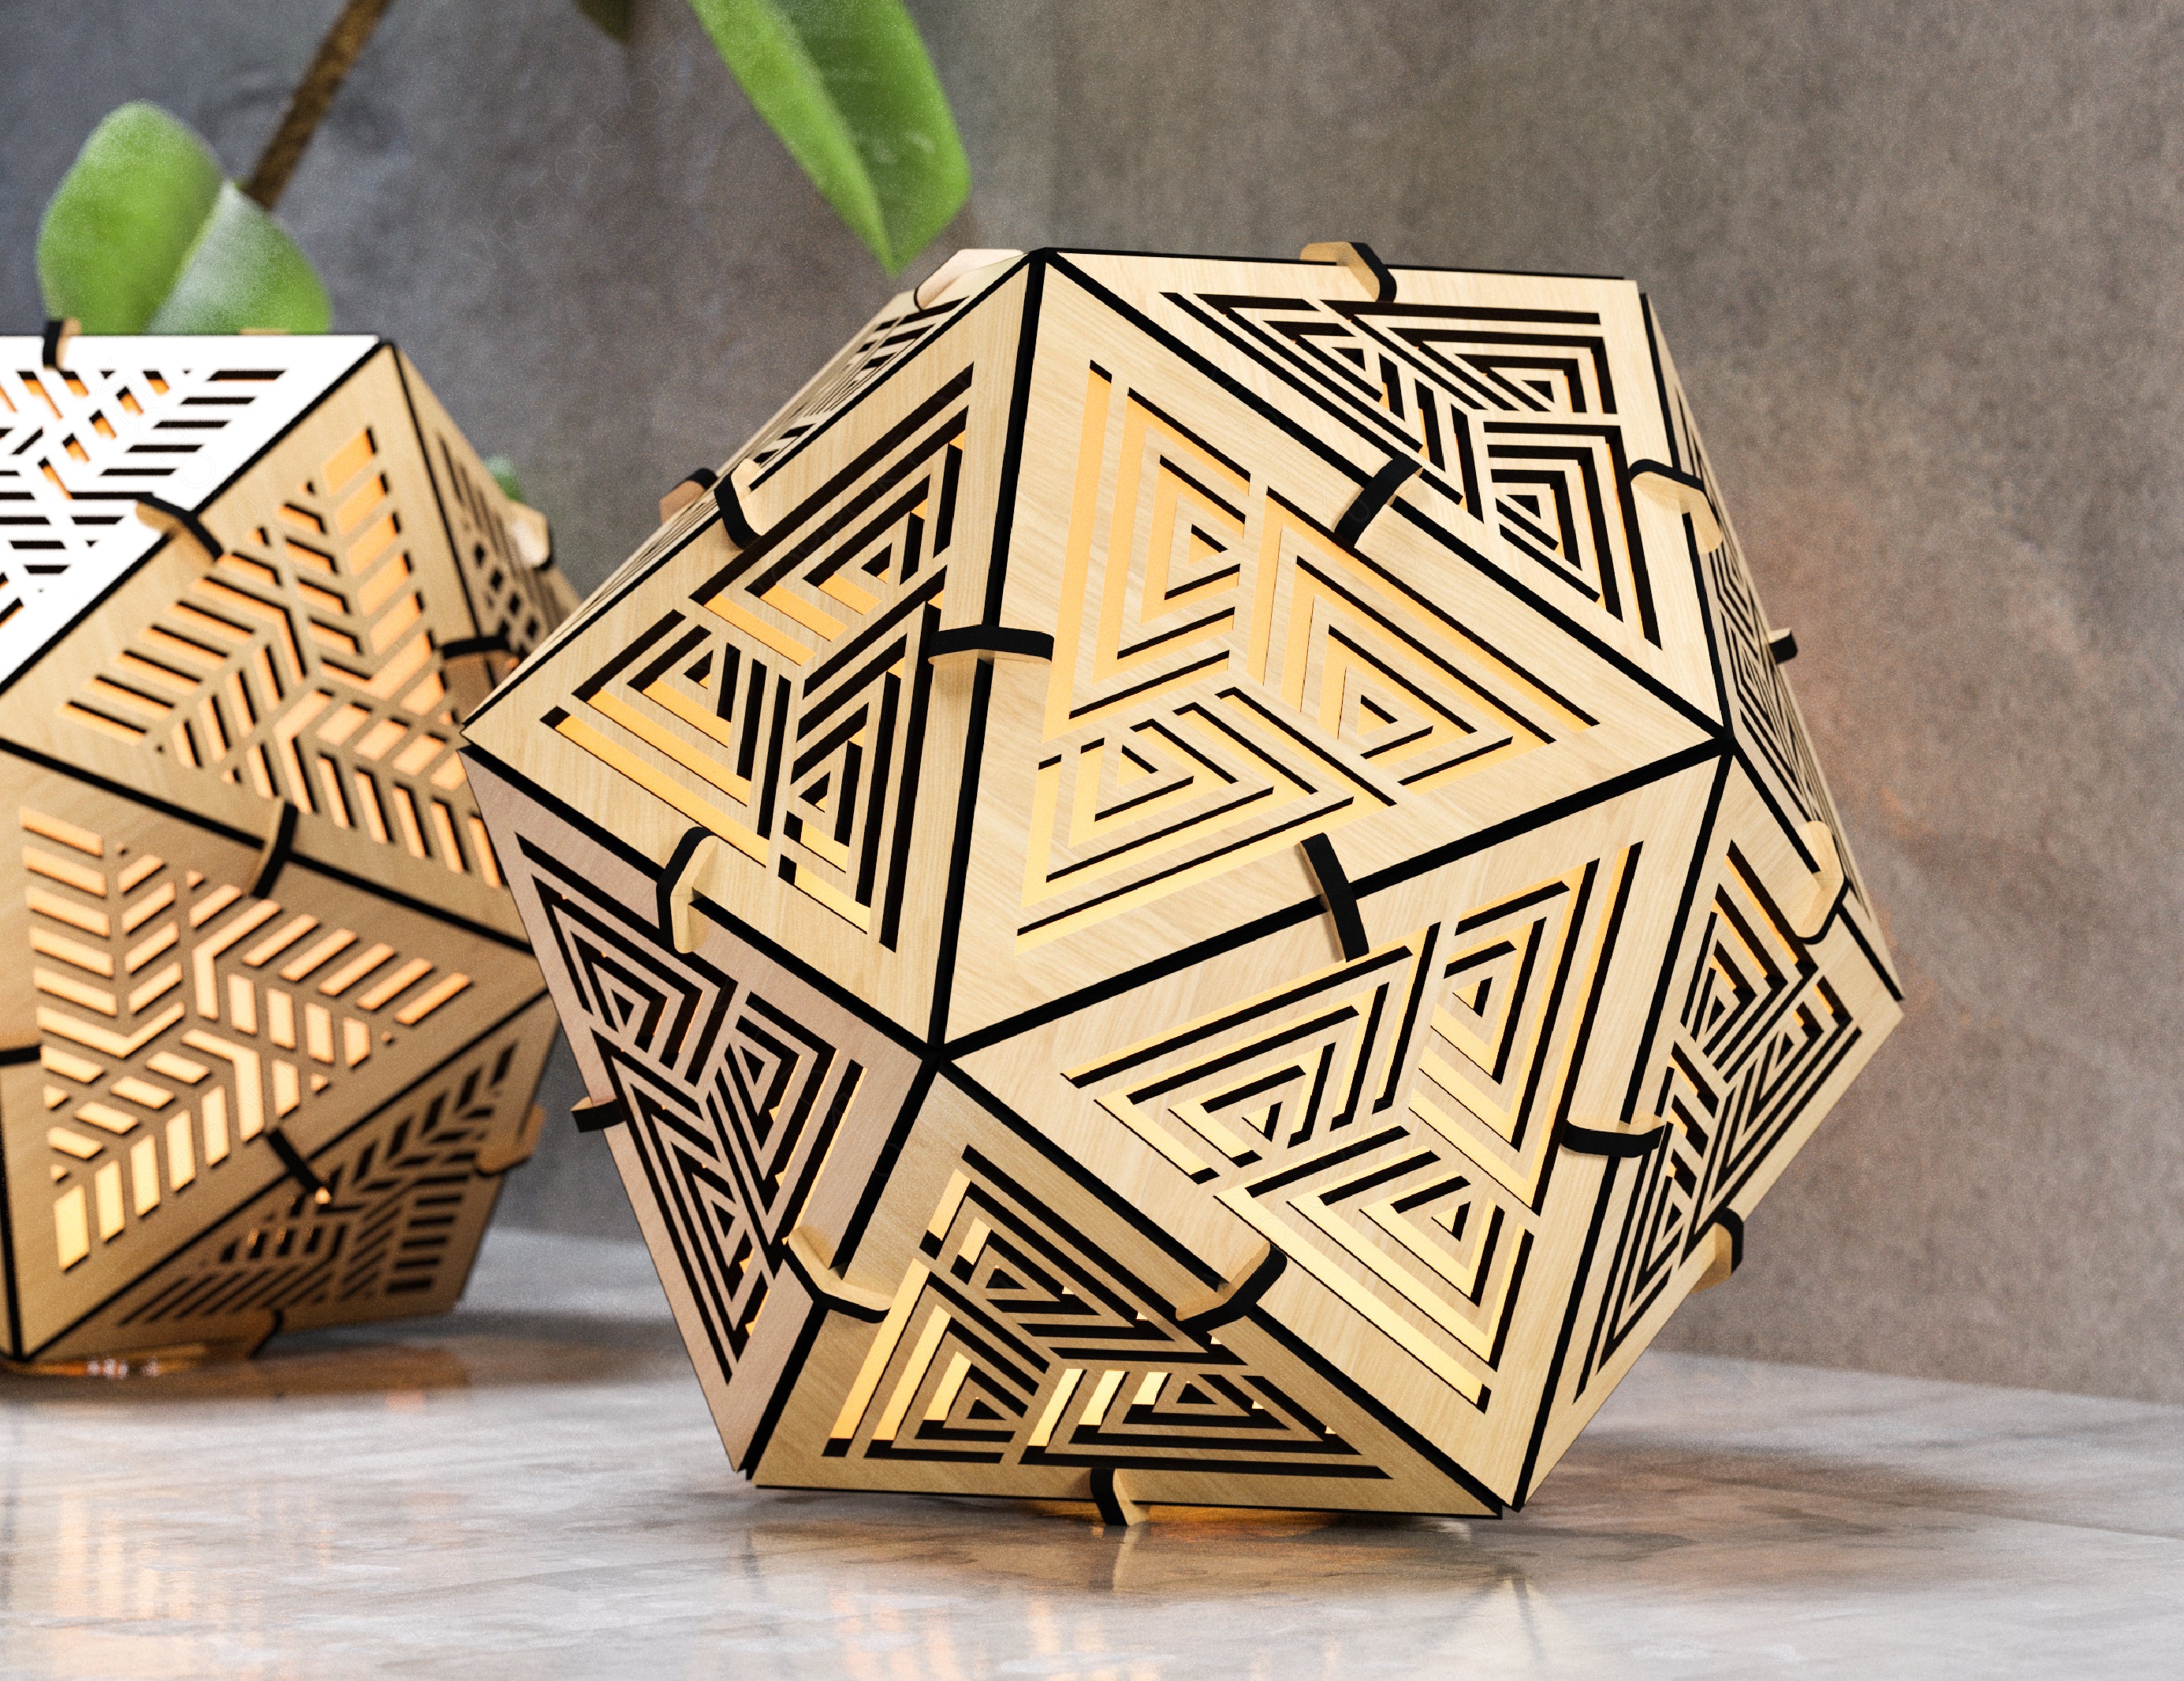 Icosahedron 3 Different Pattern wood triangle shadow lamp Tea Lantern Candle Holder Digital Download SVG |#218|